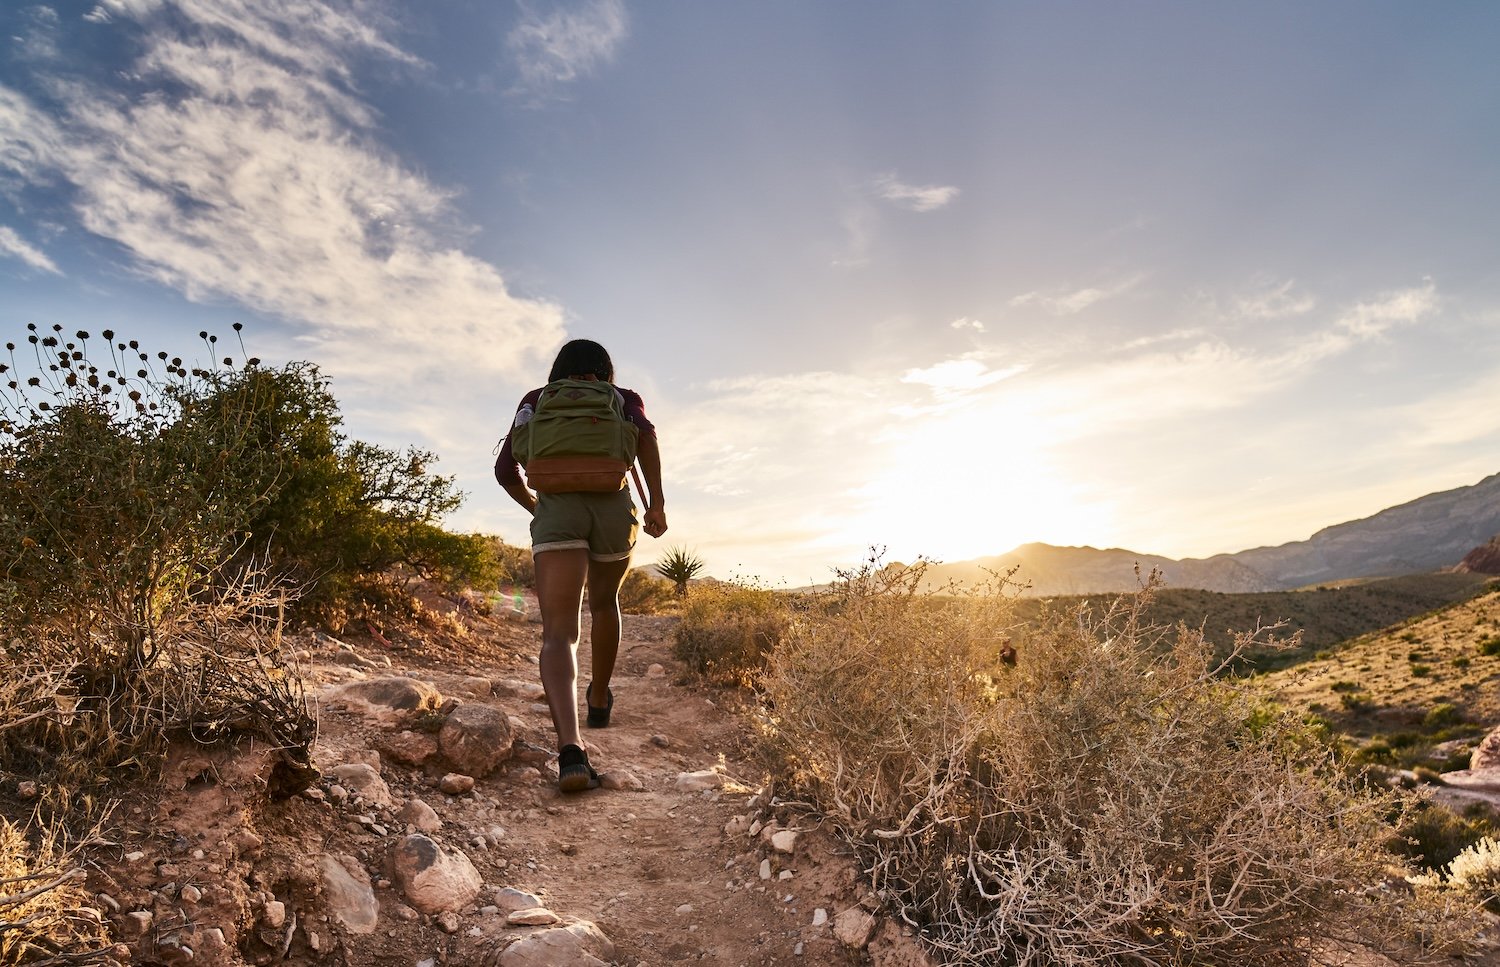 fitness tips for hiking 10+ miler hikes